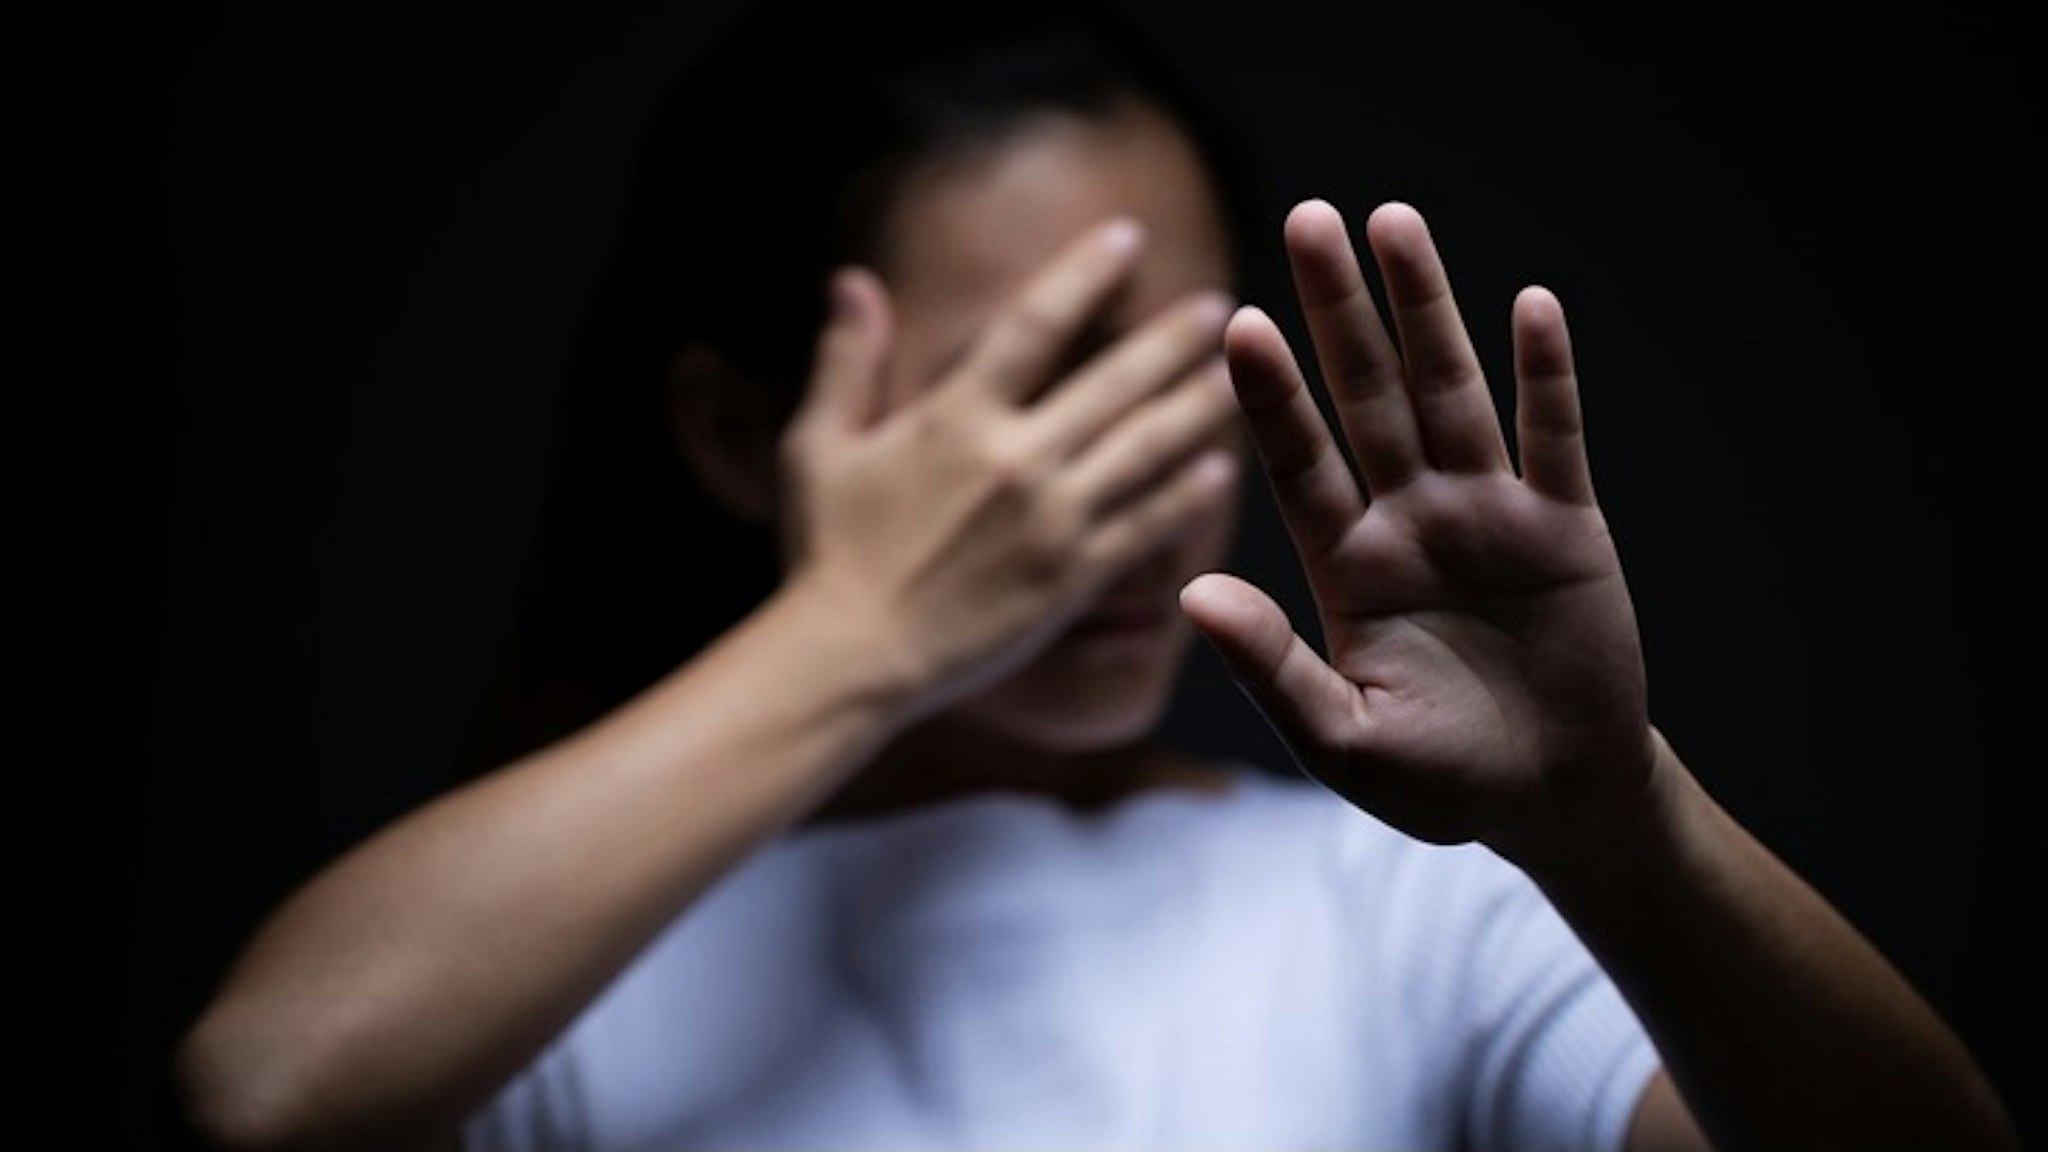 Sadness of a woman in the dark Sad Woman Covering Face With Hand Against Black Background - stock photo